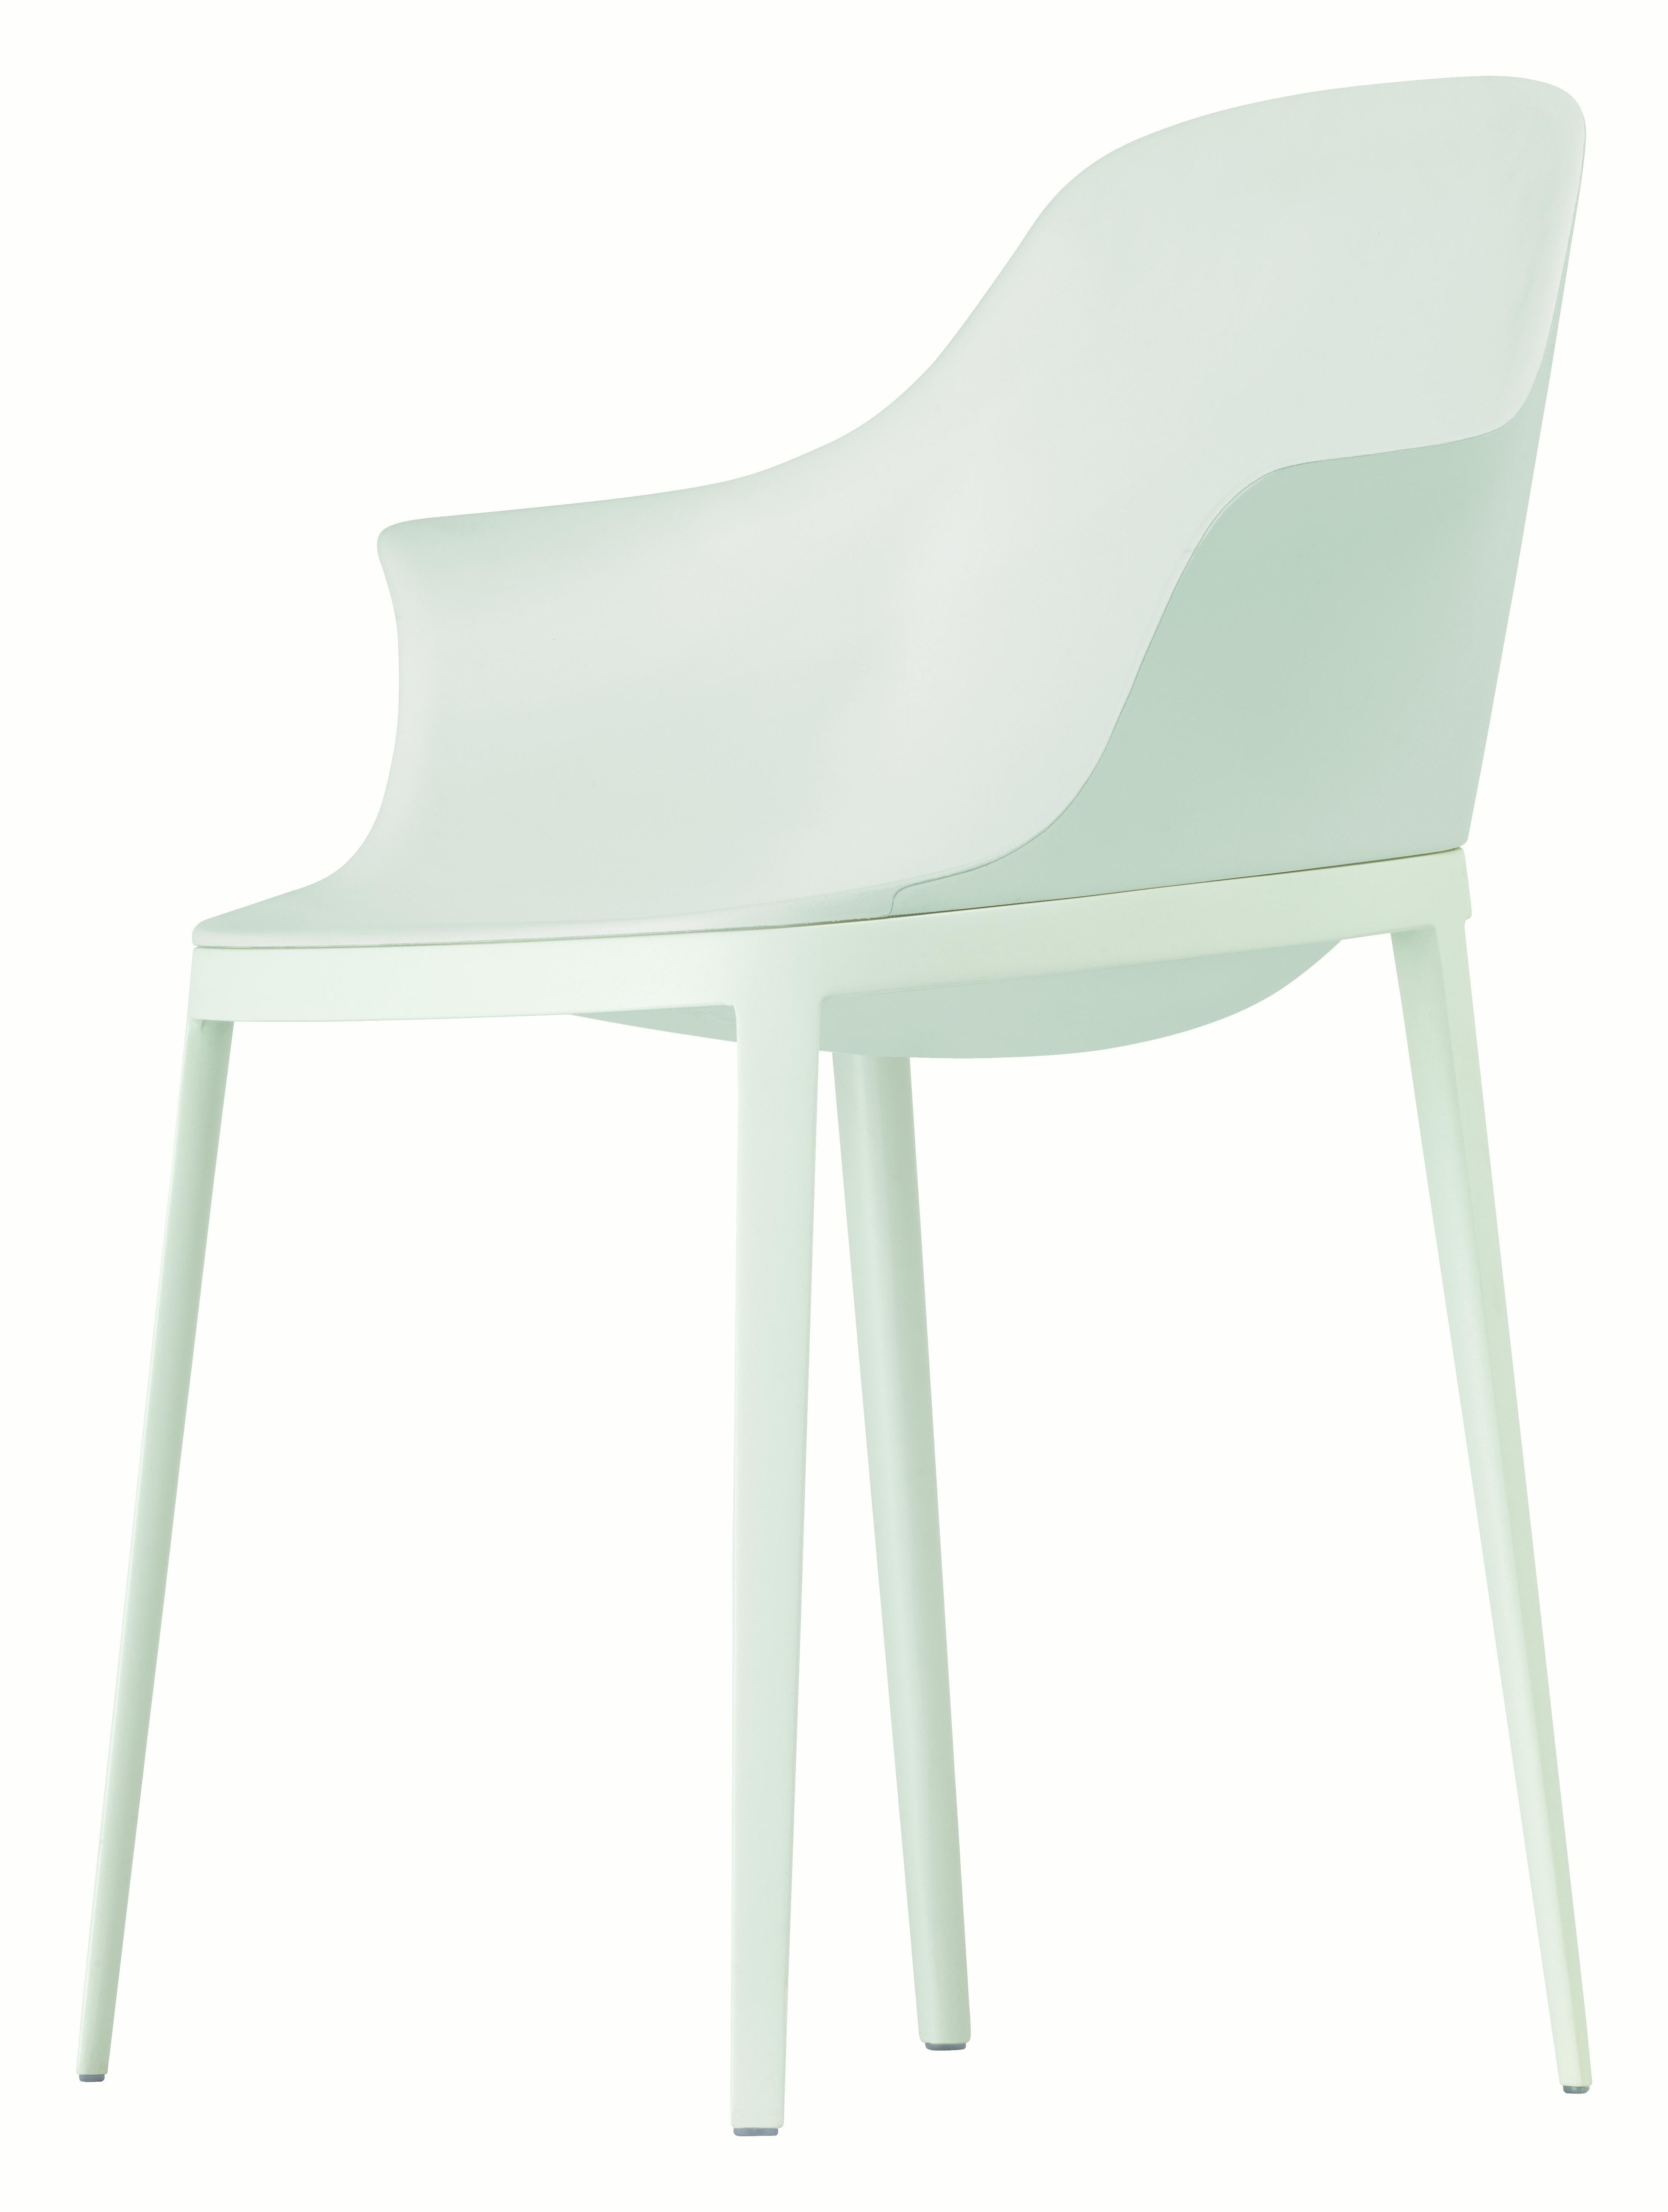 Italian Alias 073 Elle Armchair in White Lacquered Aluminum Frame by Eugeni Quitllet For Sale